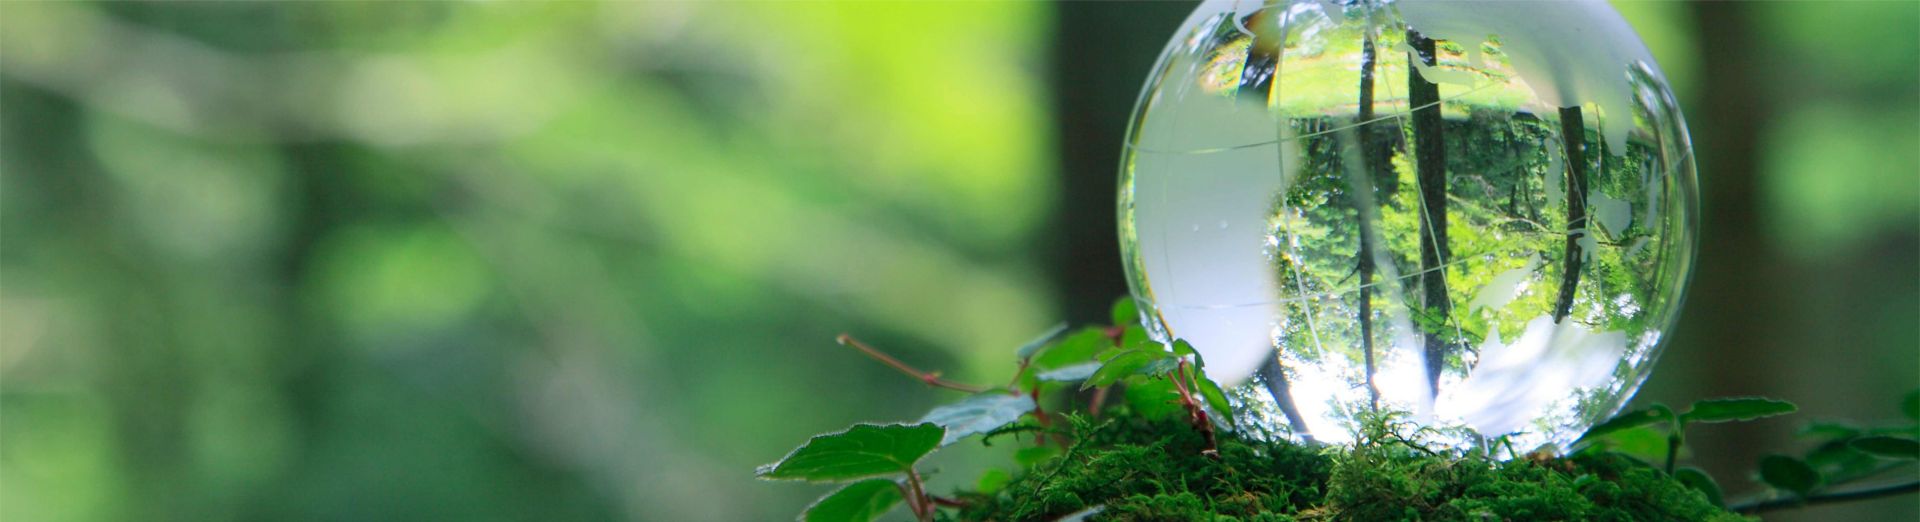 A globe made of glass placed in a forest reflecting the trees